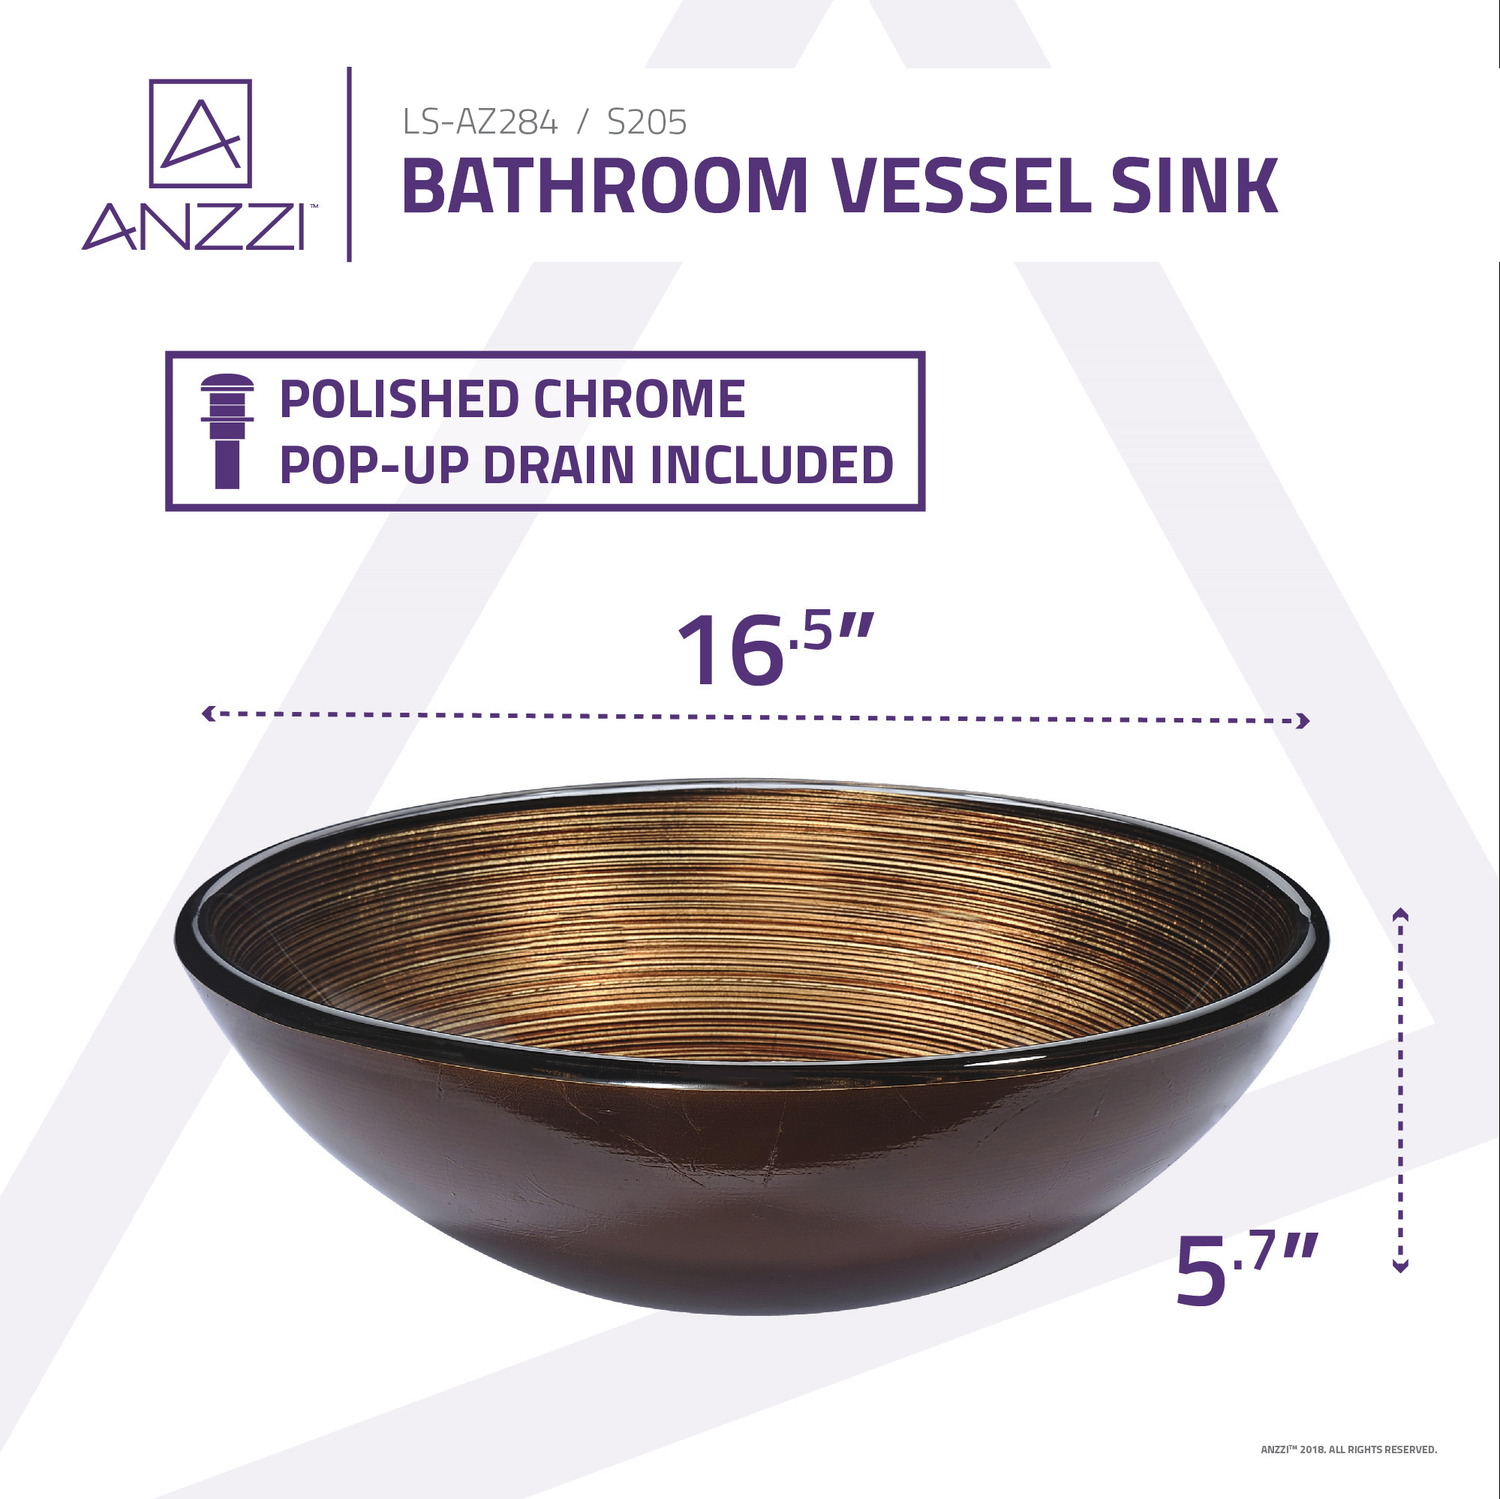 bathroom cabinet without sink Anzzi BATHROOM - Sinks - Vessel - Tempered Glass Brown